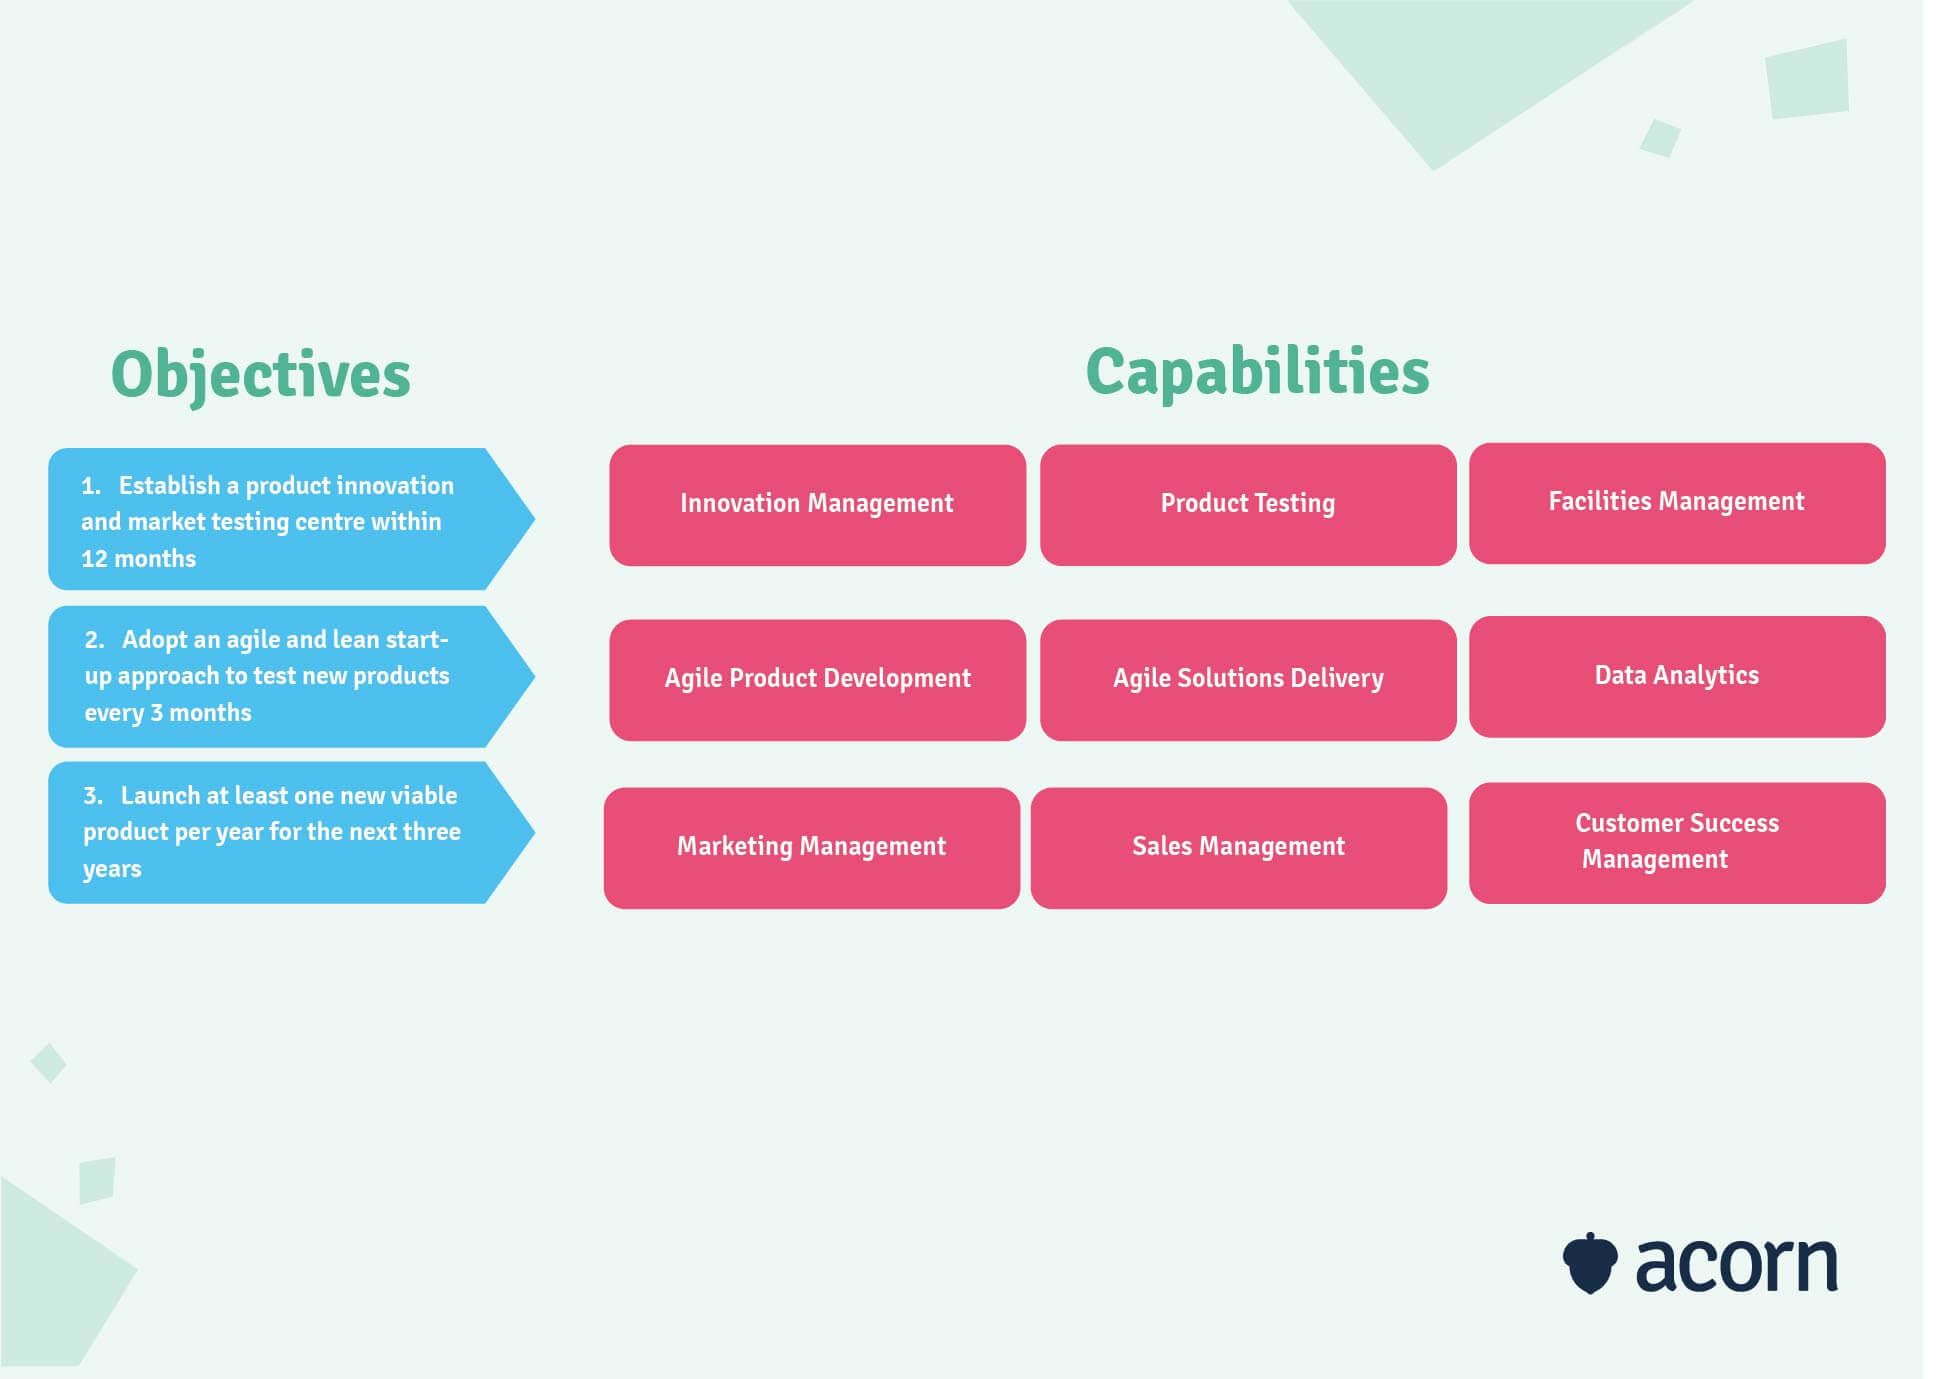 infographic showing how to define business capabilities from business objectives